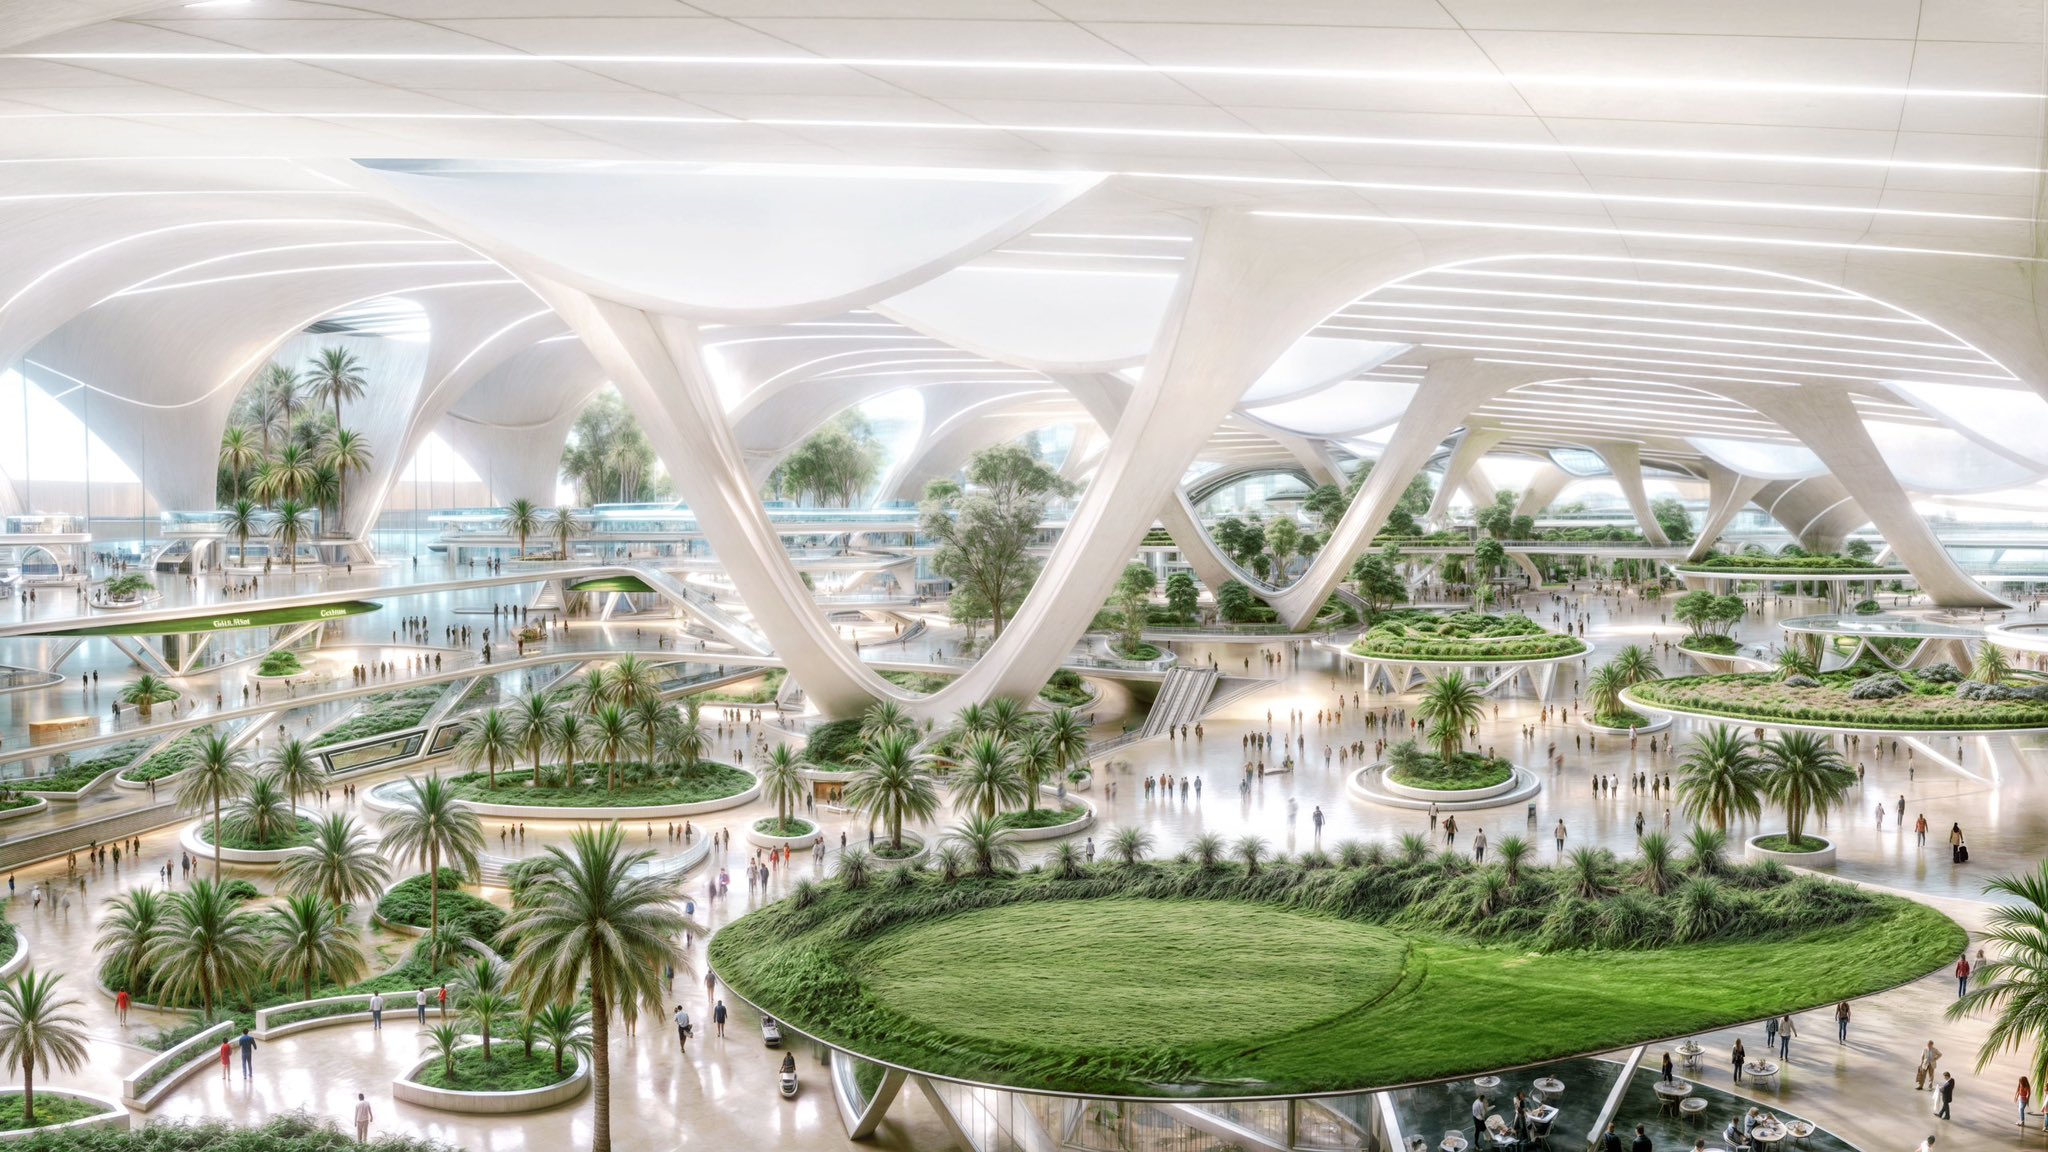 This image released on April 28, 2024, shows the interior view of the approved design of Al Maktoum International Airports new passenger terminal. — X/@HHShkMohd